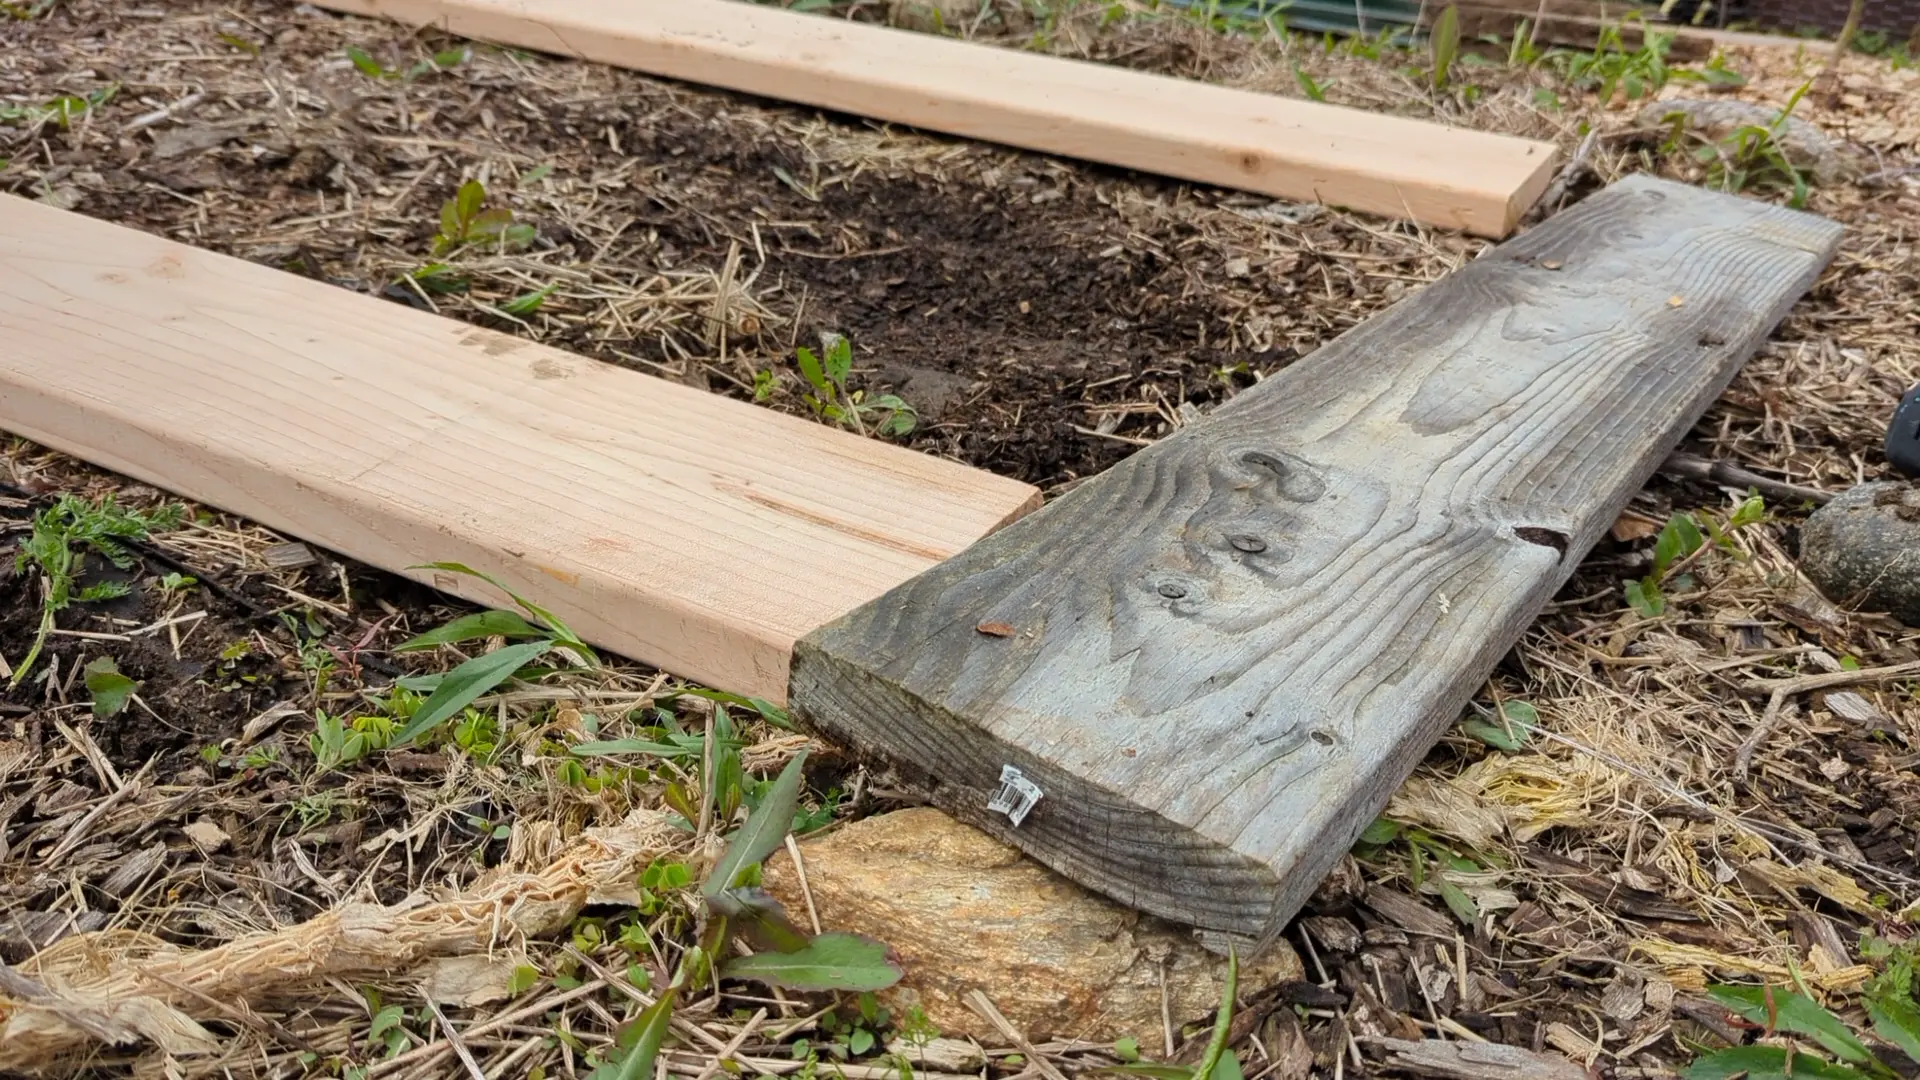 Three pine boards laying on the ground.